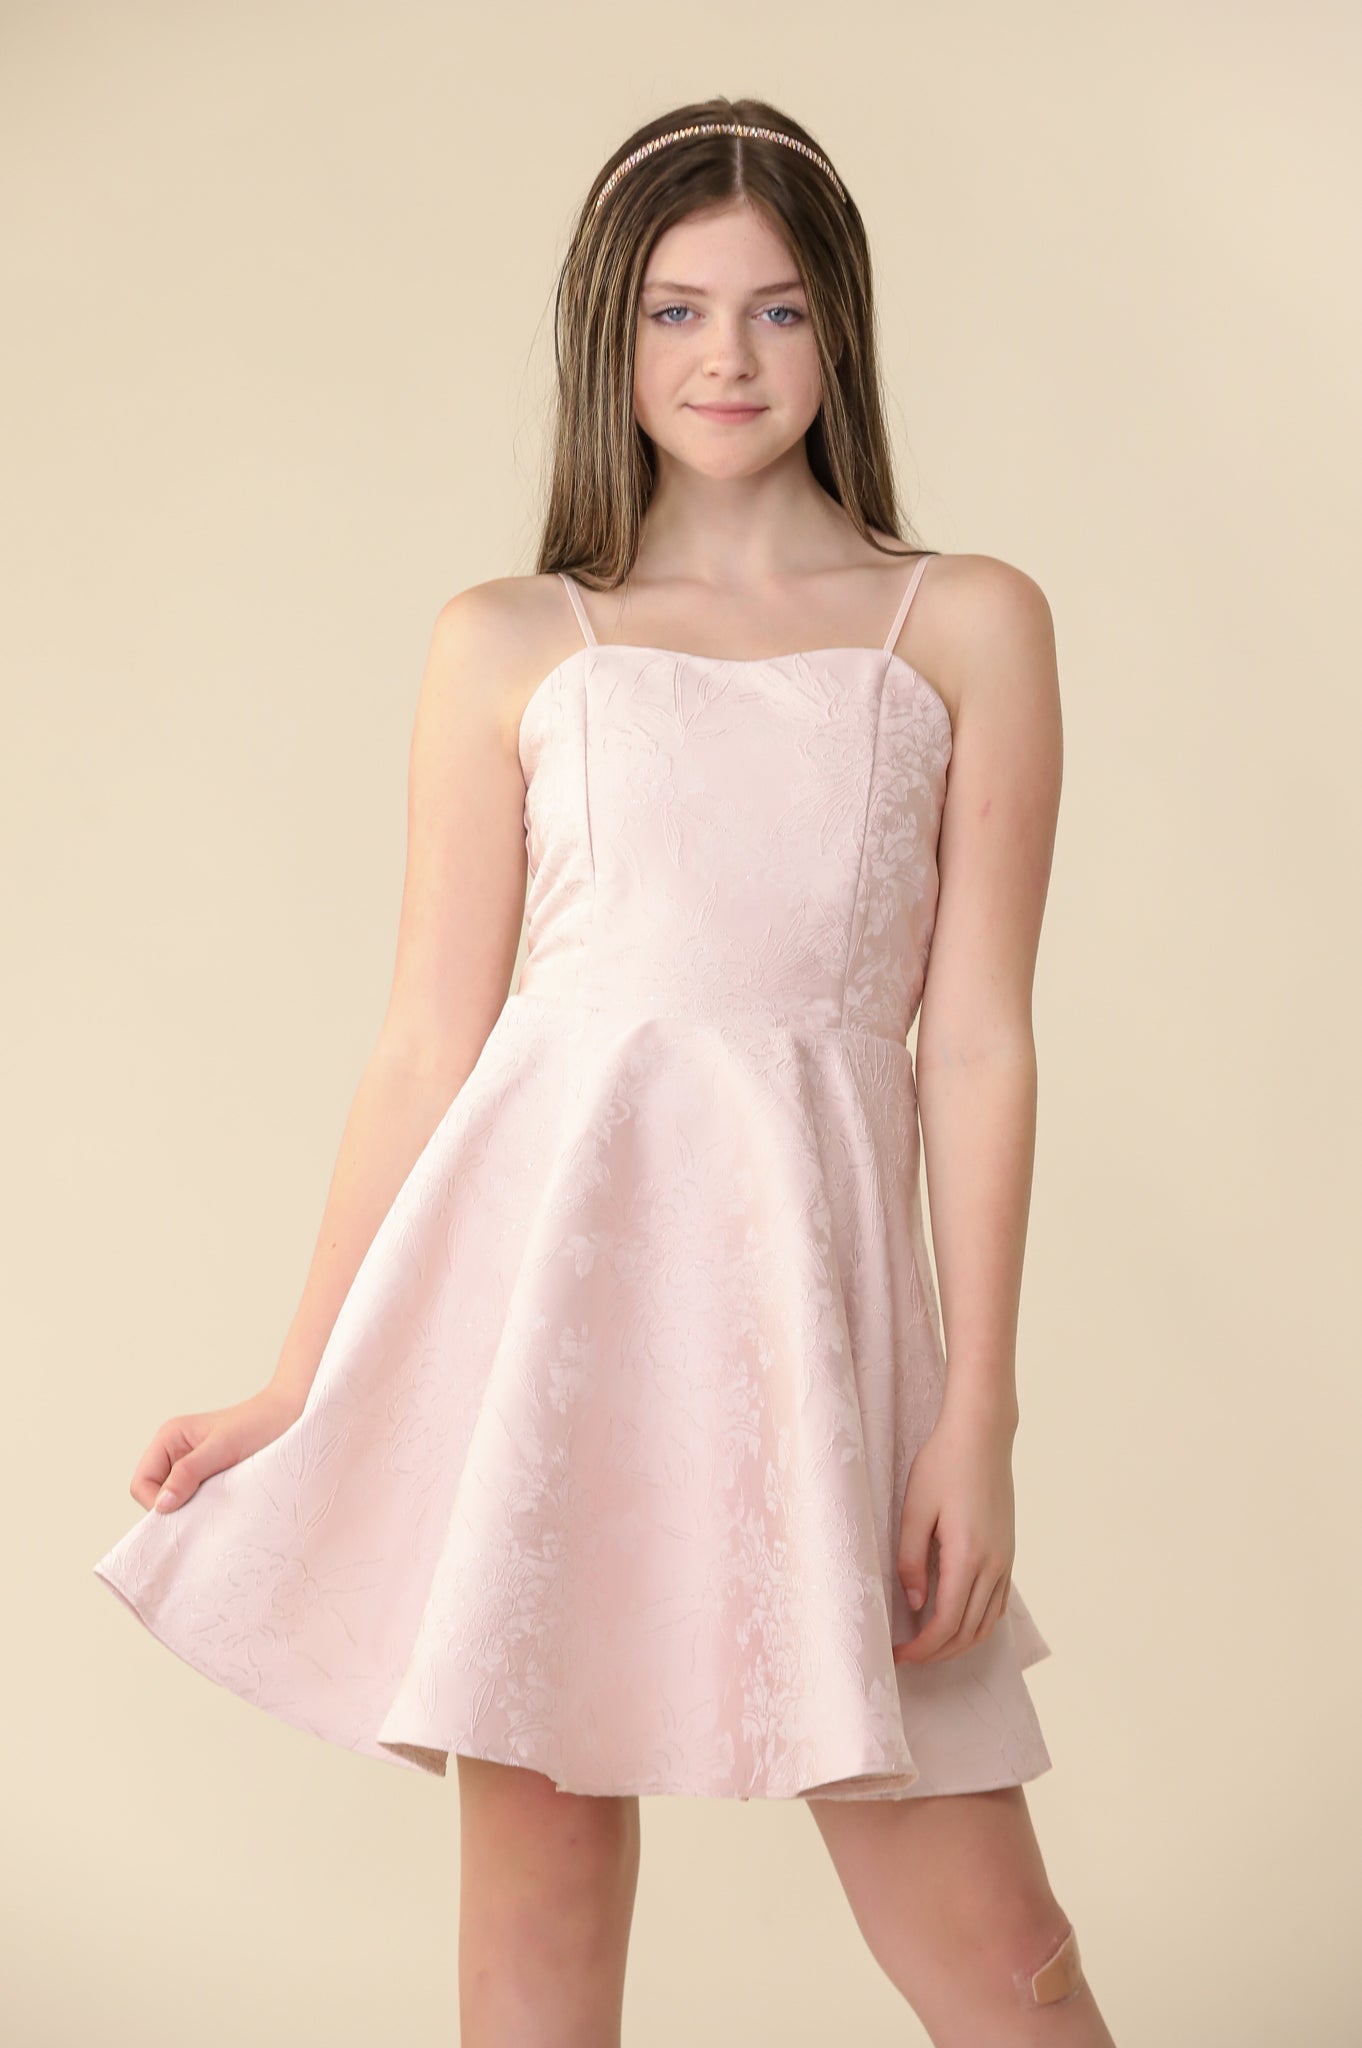 This is an all over, non-stretch floral fabric dress in blush pink. Hits right above the knee for a chic and sophisticated look. It features adjustable straps and full circle skirt.